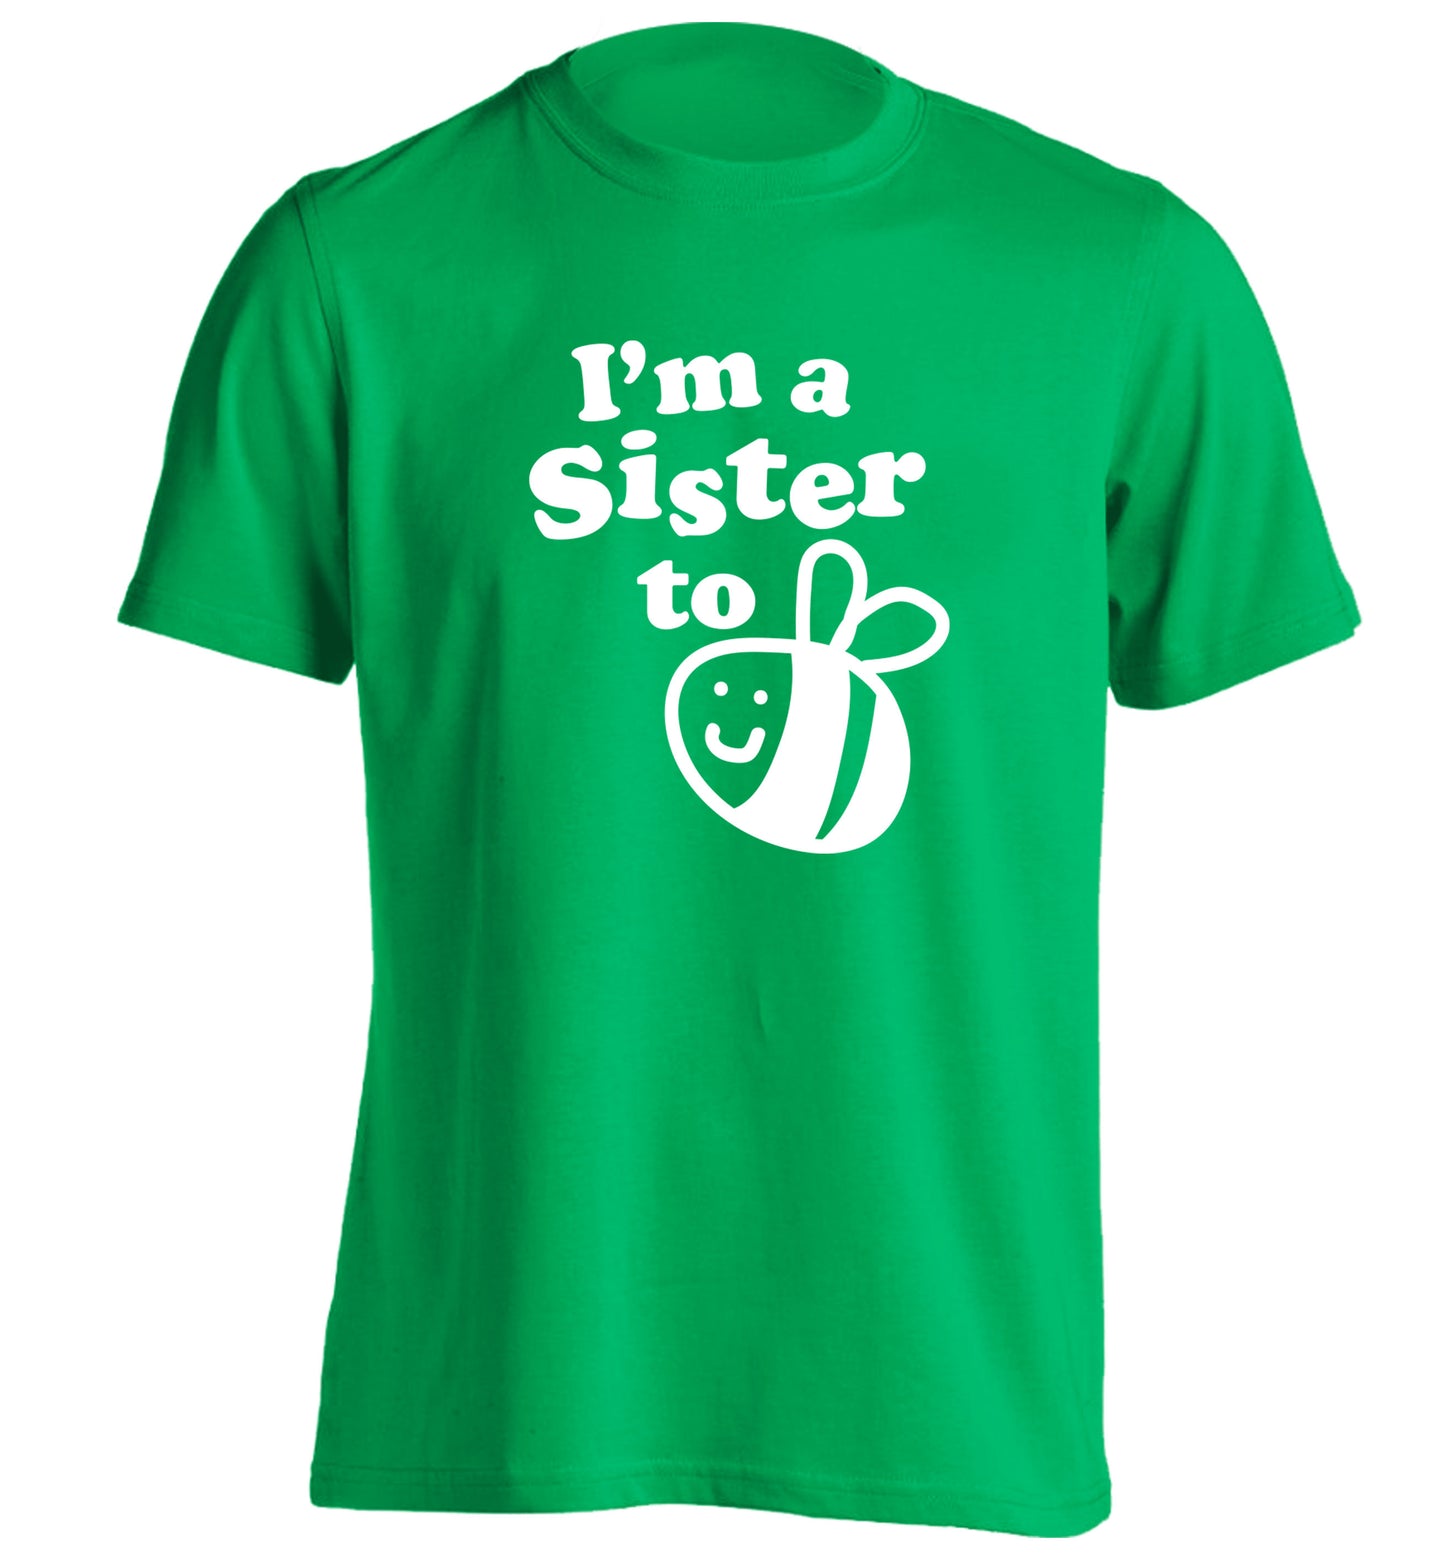 I'm a sister to be adults unisex green Tshirt 2XL